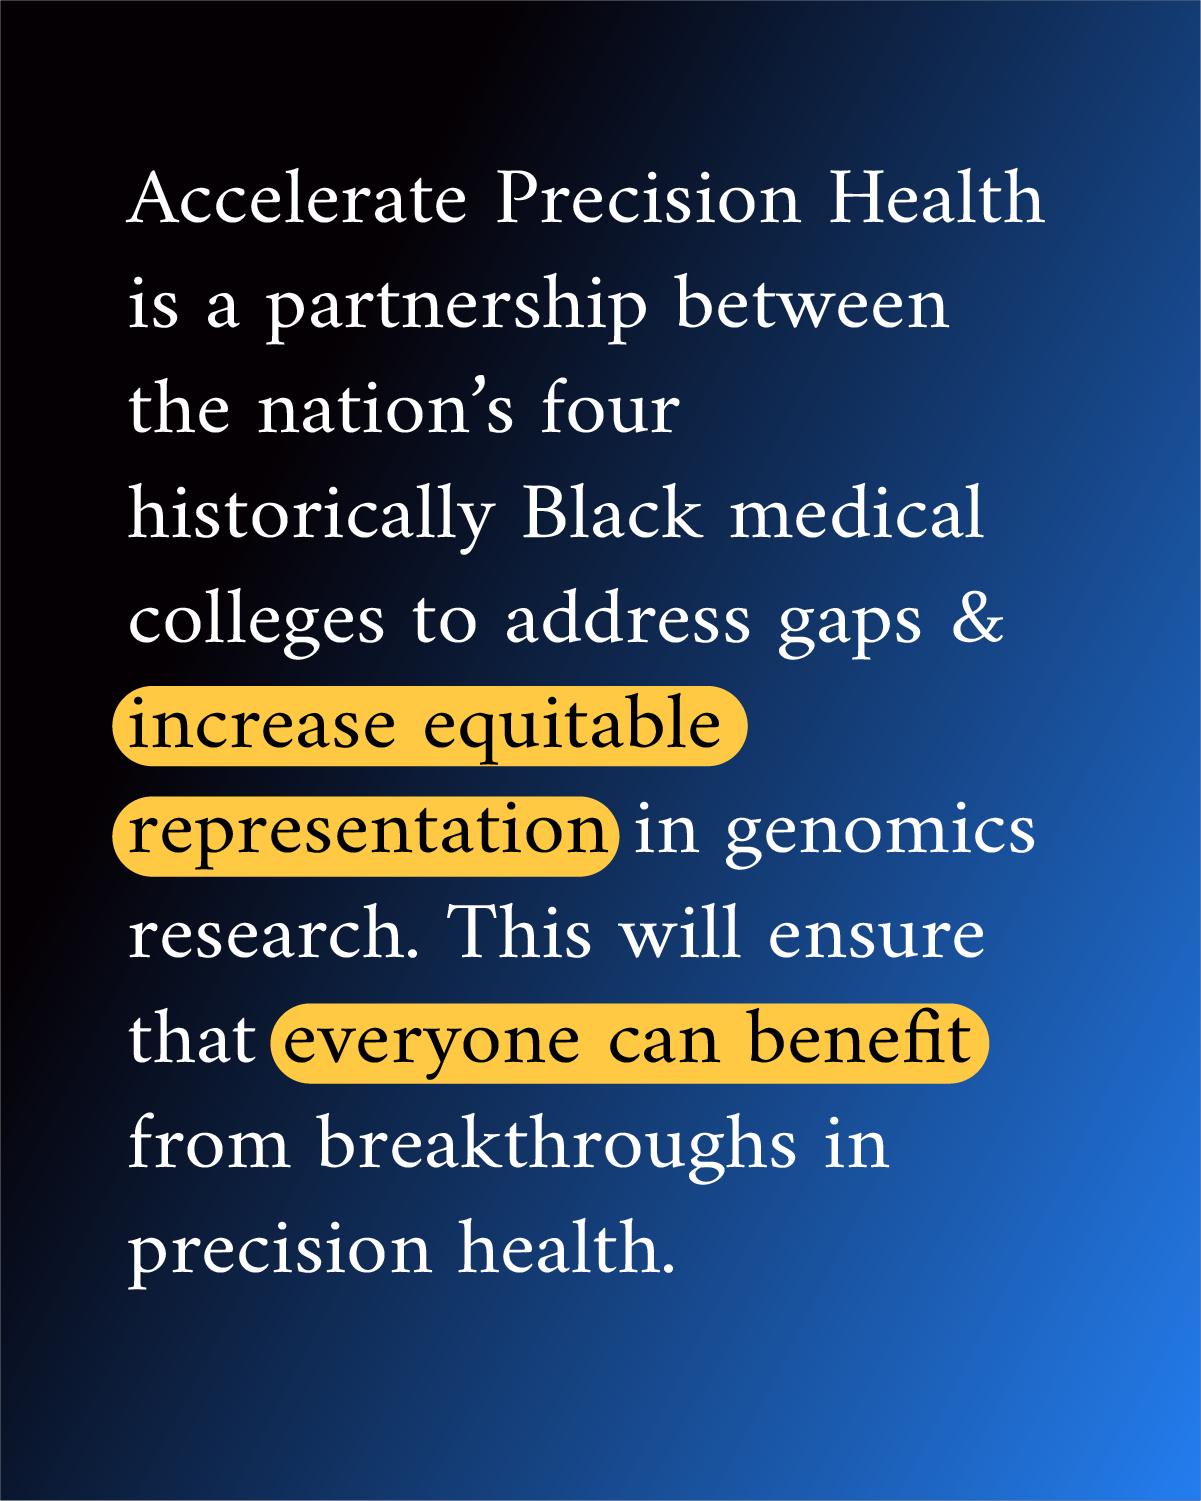 Infographic reads “Accelerate Precision Health is a partnership between the nation’s four historically Black medical colleges to address gaps & increase equitable representation in genomics research. This will ensure that everyone can benefit from breakthroughs in precision health.” Text is displayed on a black and blue background.